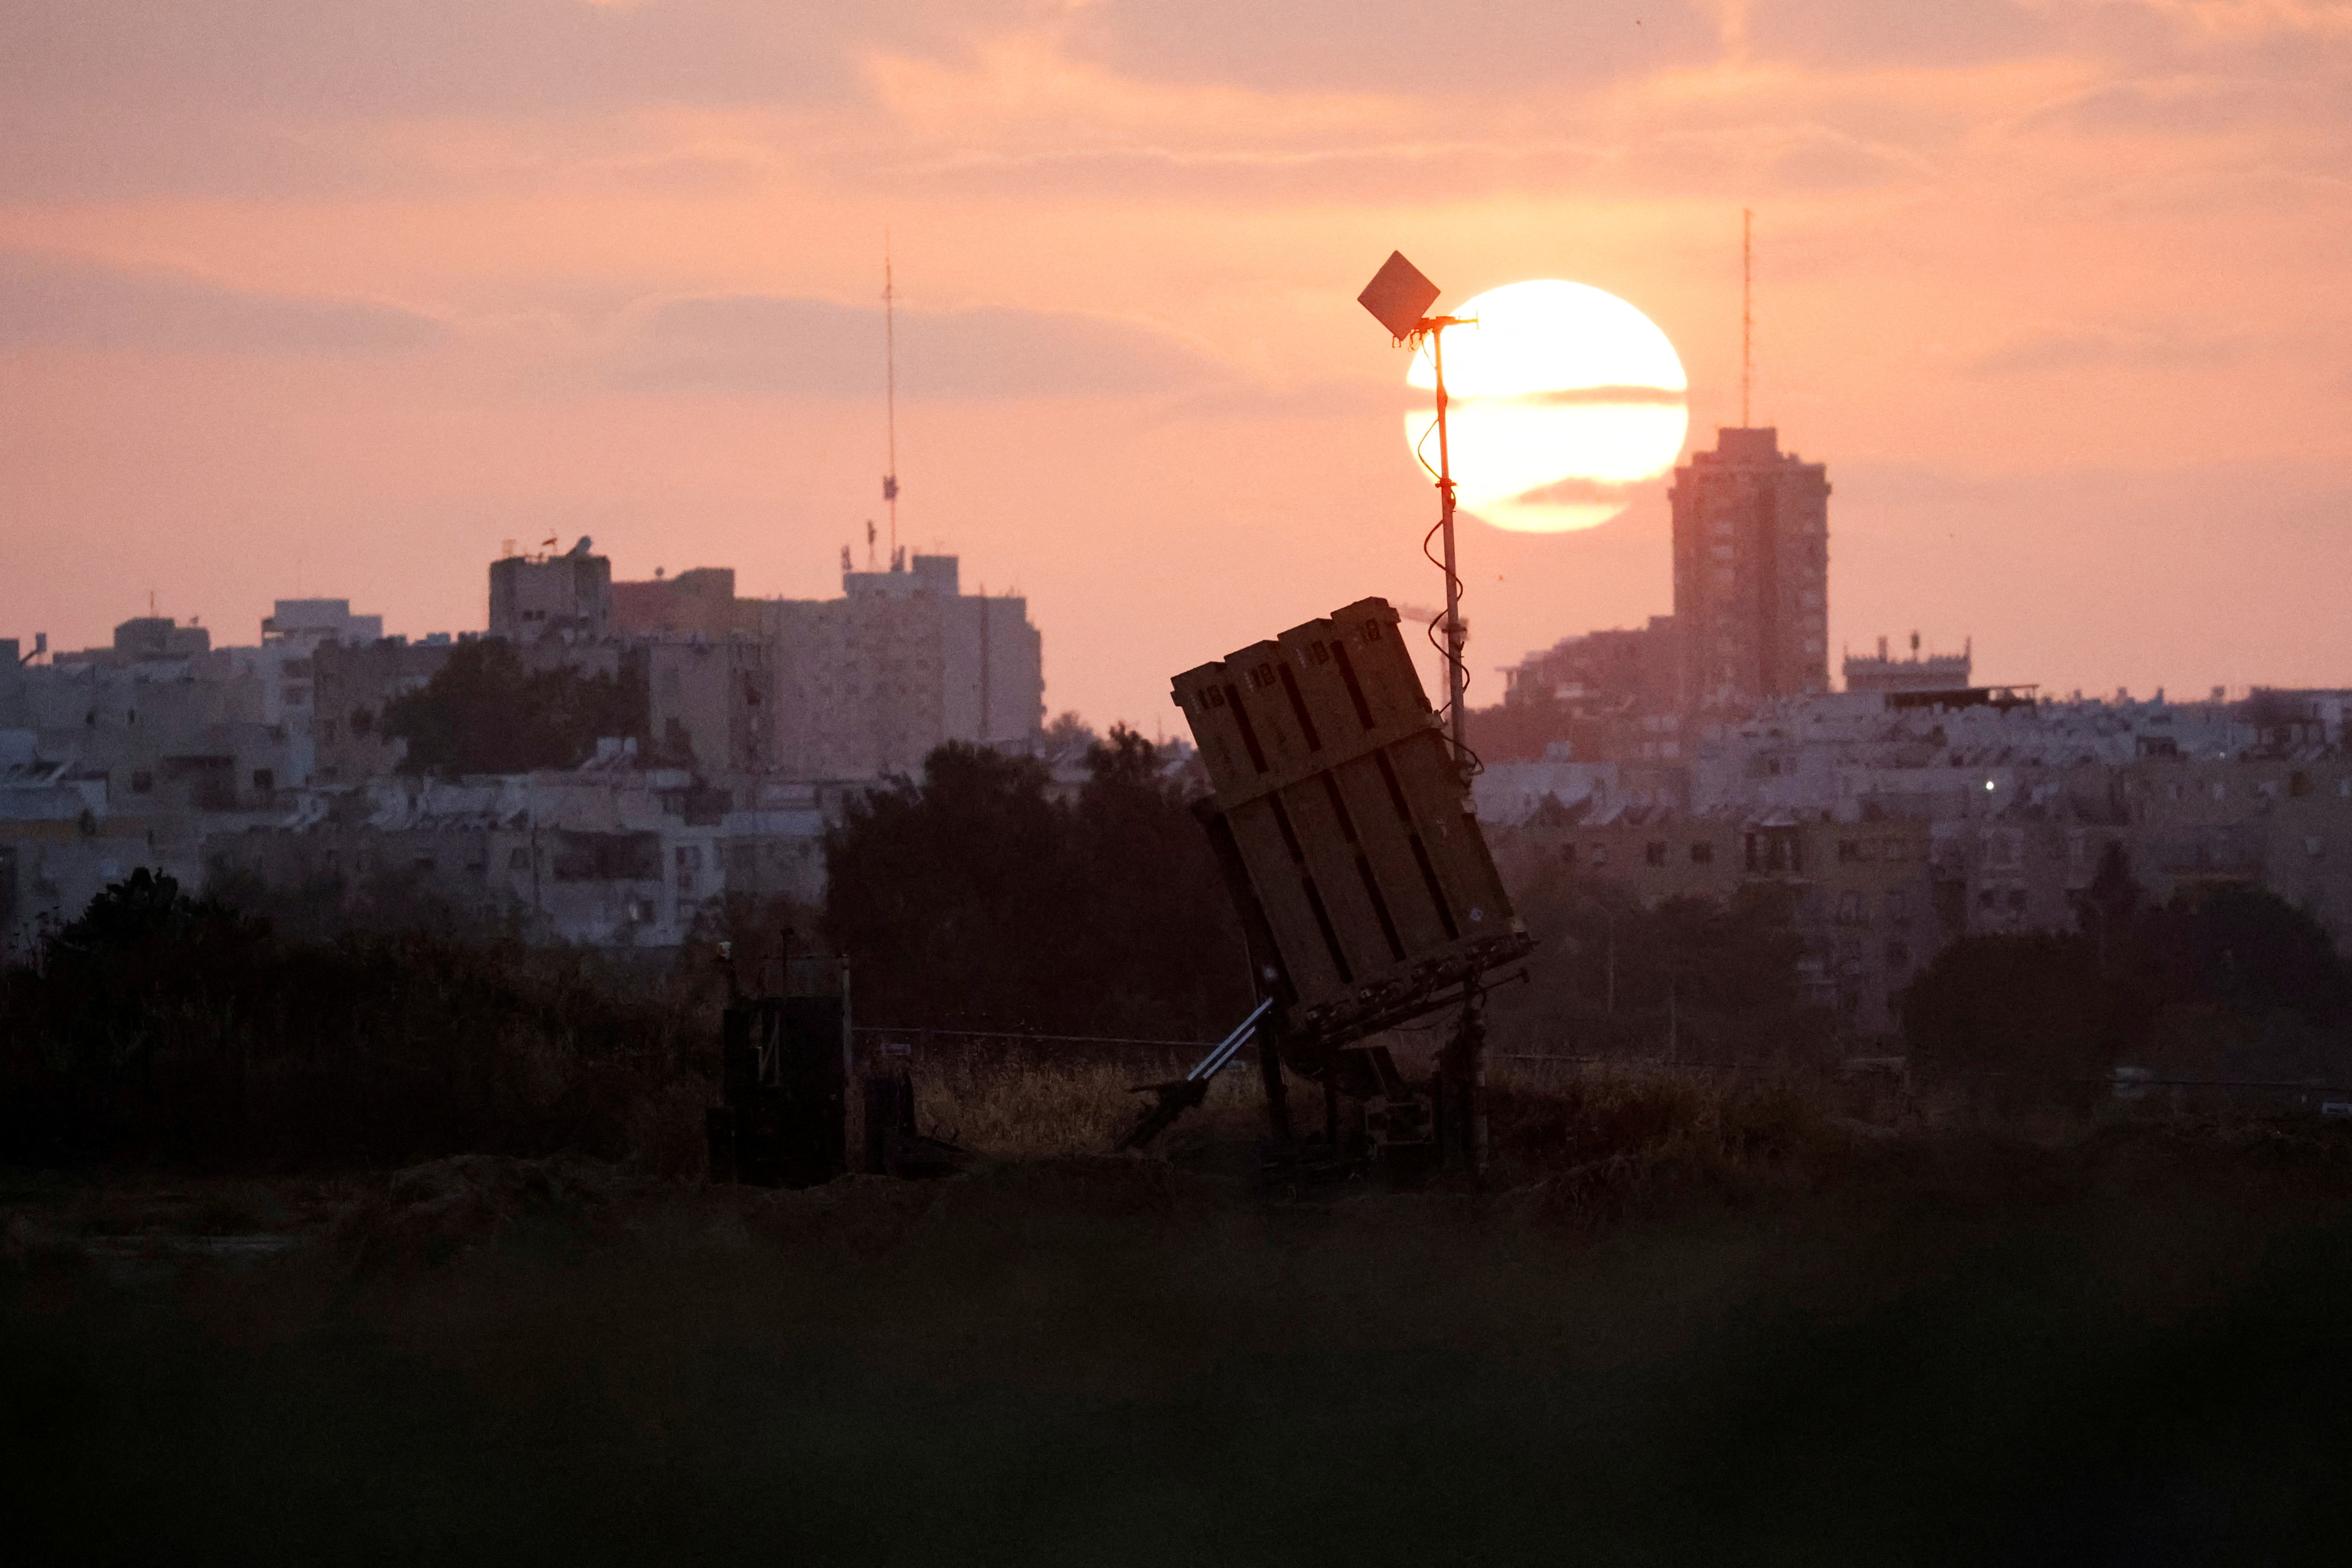 An Israel's Iron Dome anti-missile system seen in position near Ashdod